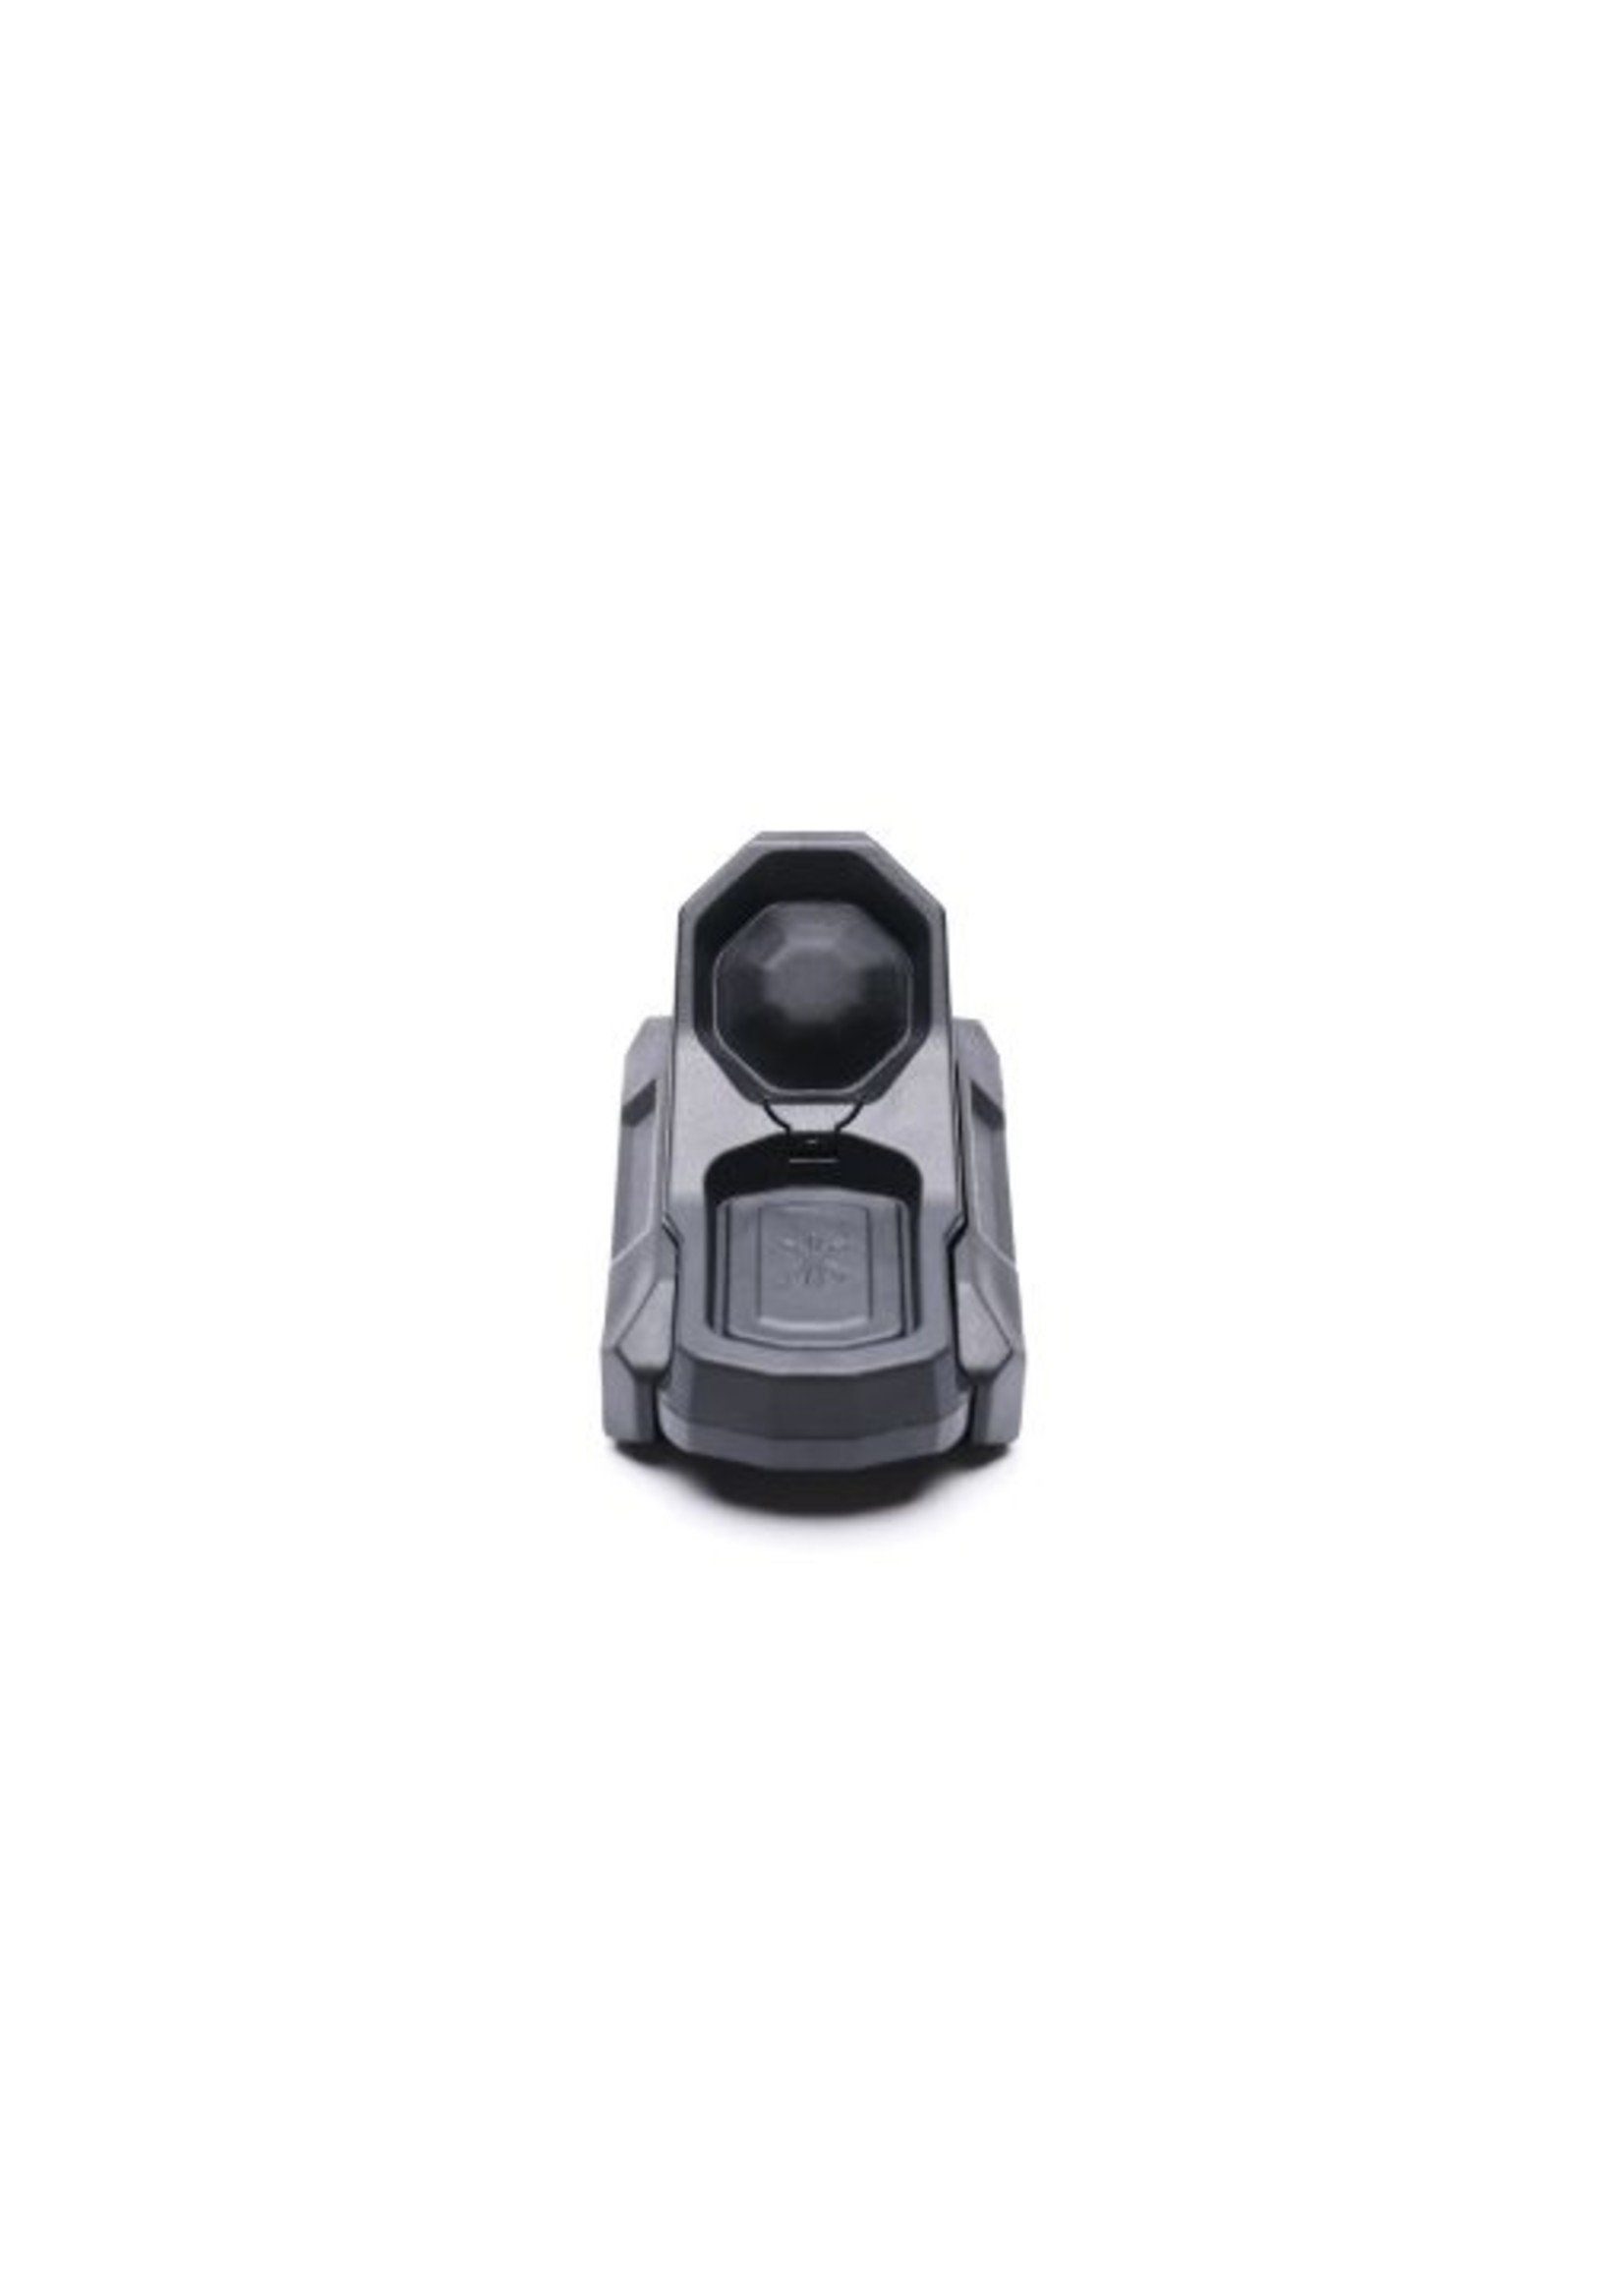 UNITY TACTICAL AXON DUAL REMOTE SWITCH